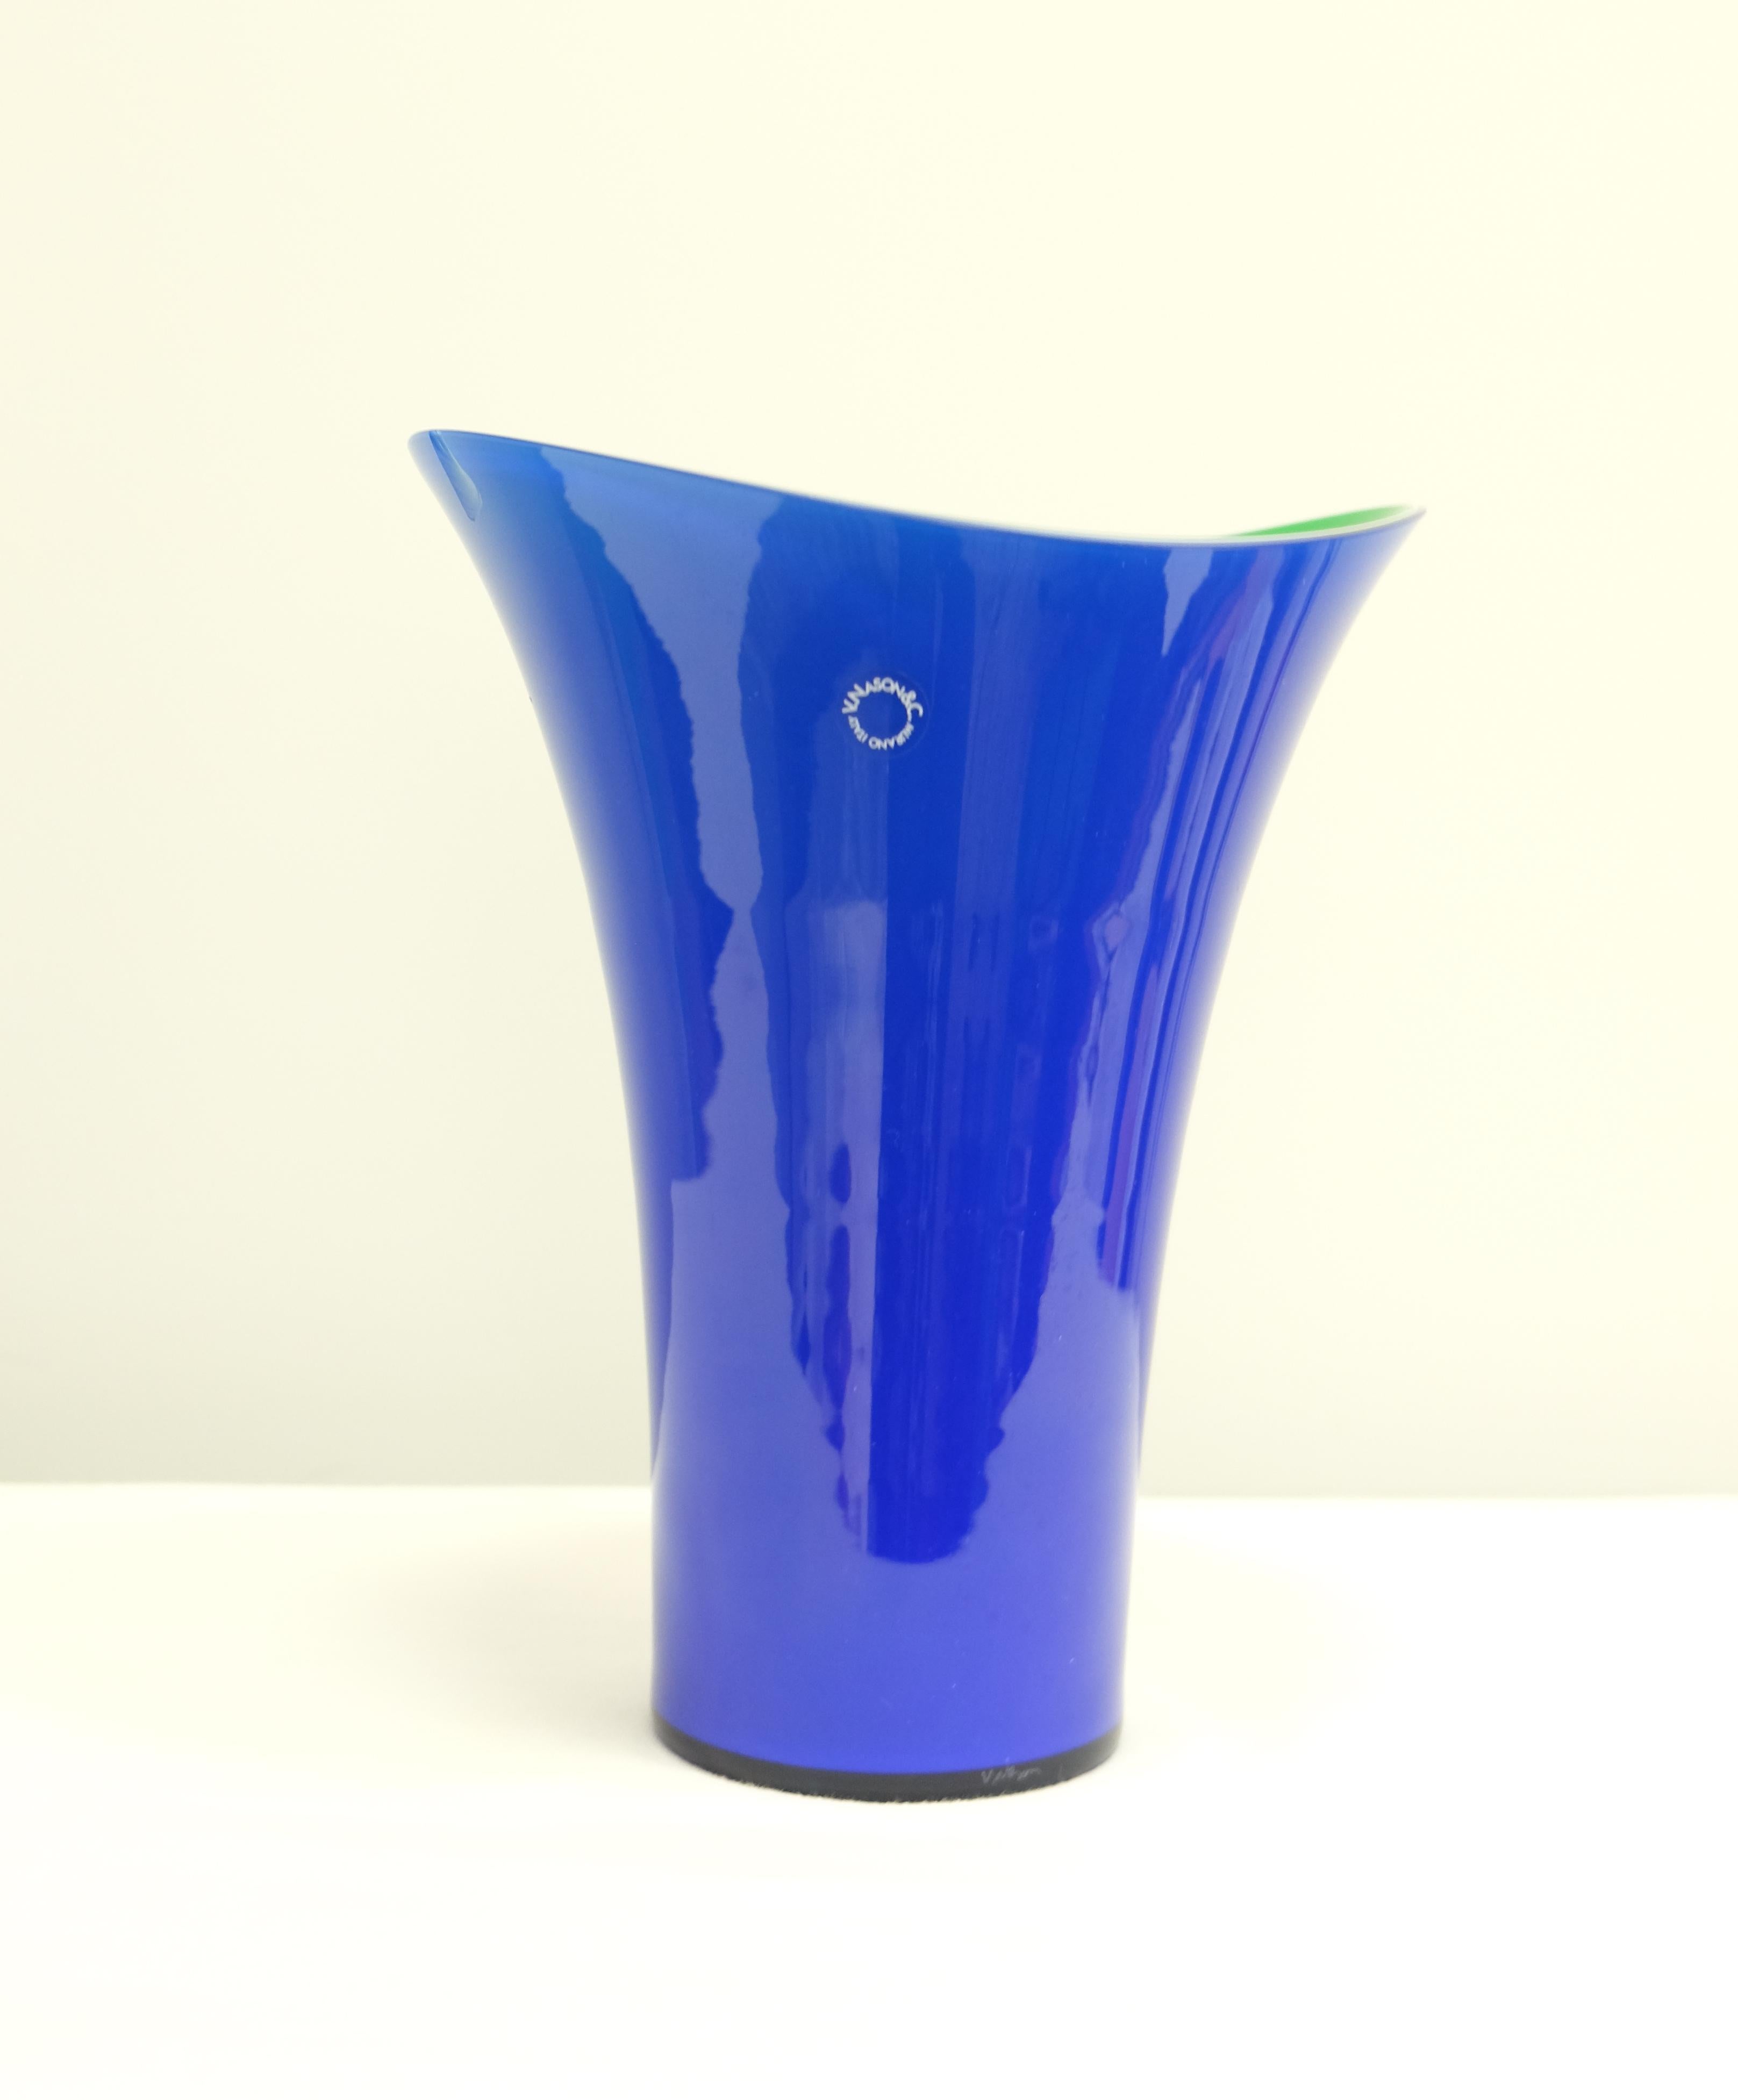 Murano Glass Vase Set by V. Nason & C. Italy, Blue and Green Asymmetric Vases In Excellent Condition For Sale In Miami, FL